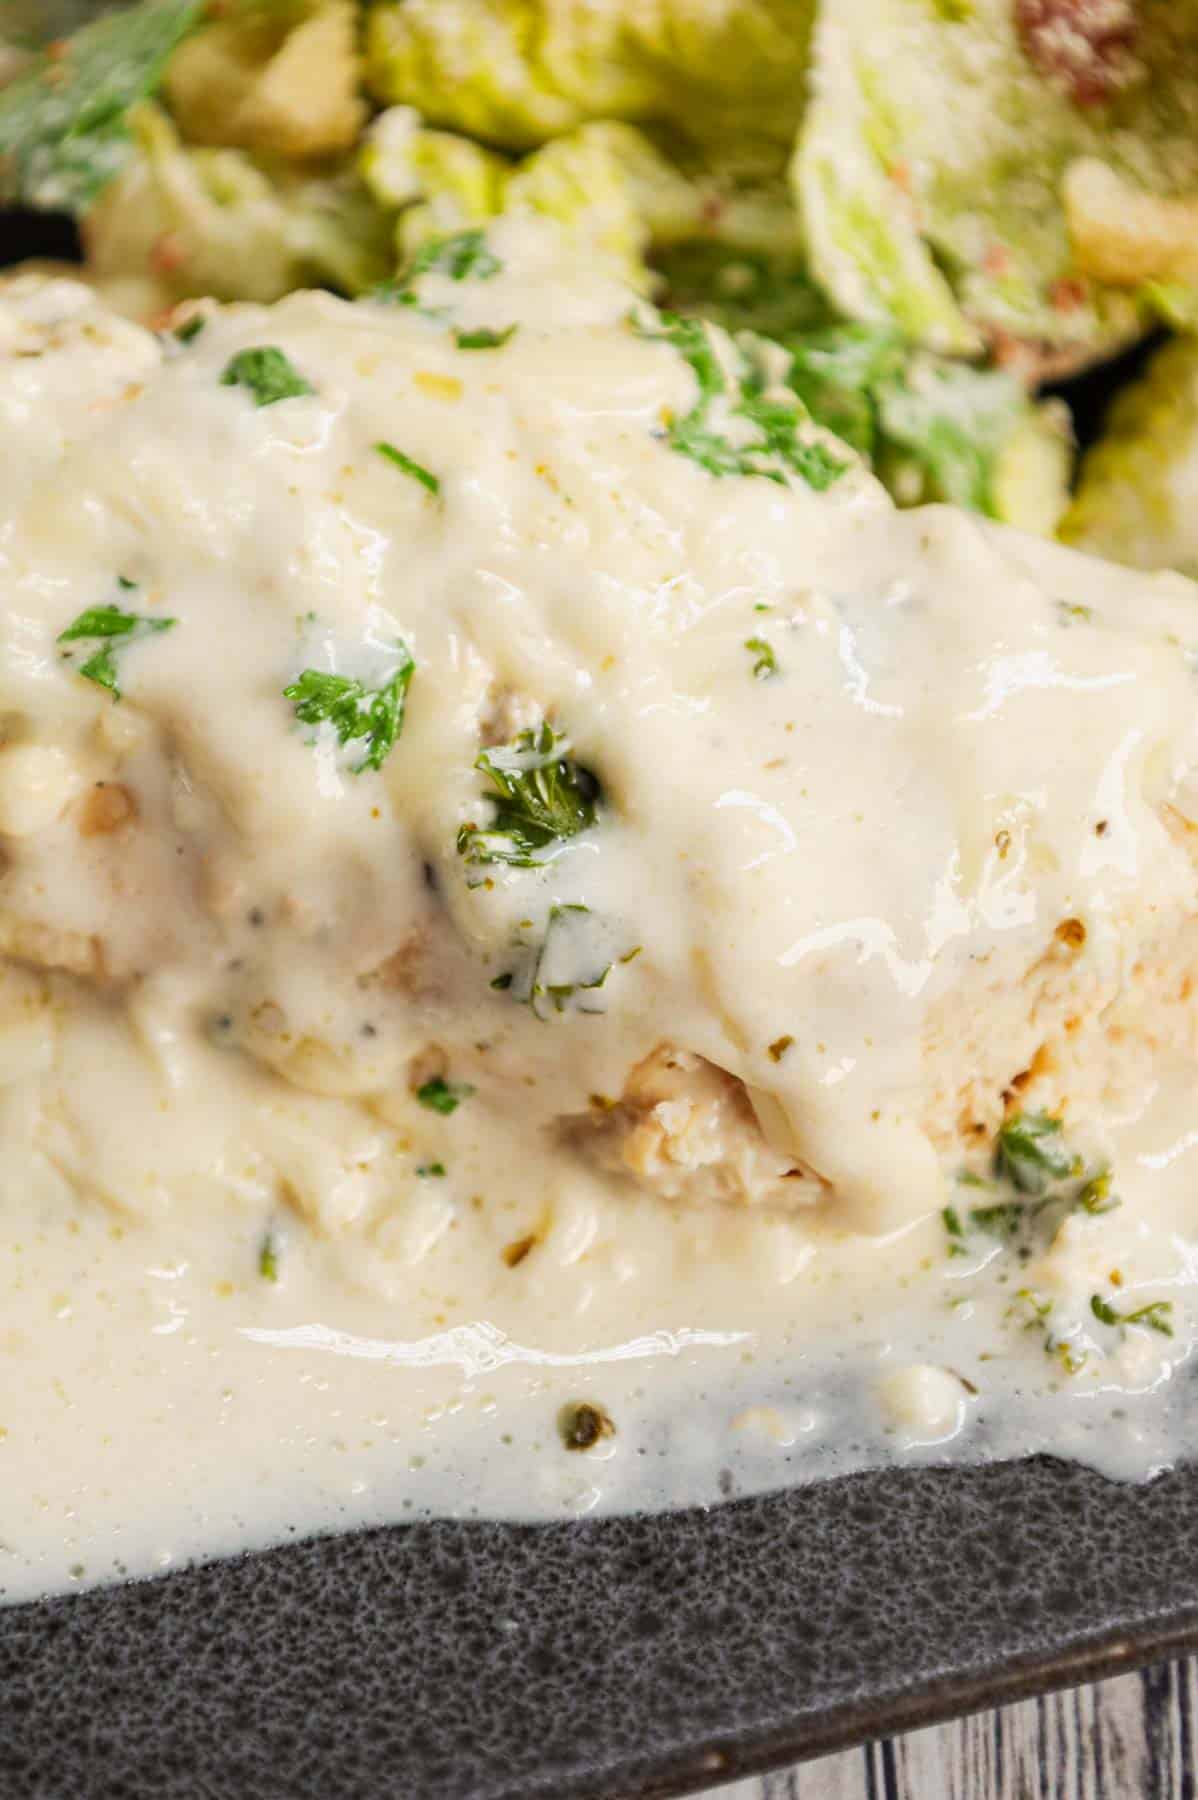 Crock Pot Parmesan Garlic Chicken is a rich and delicious slow cooker dish made with boneless, skinless chicken breasts in a creamy sauce loaded with minced garlic, parmesan cheese, Italian seasoning, fresh chopped parsley, cream cheese and mozzarella cheese.